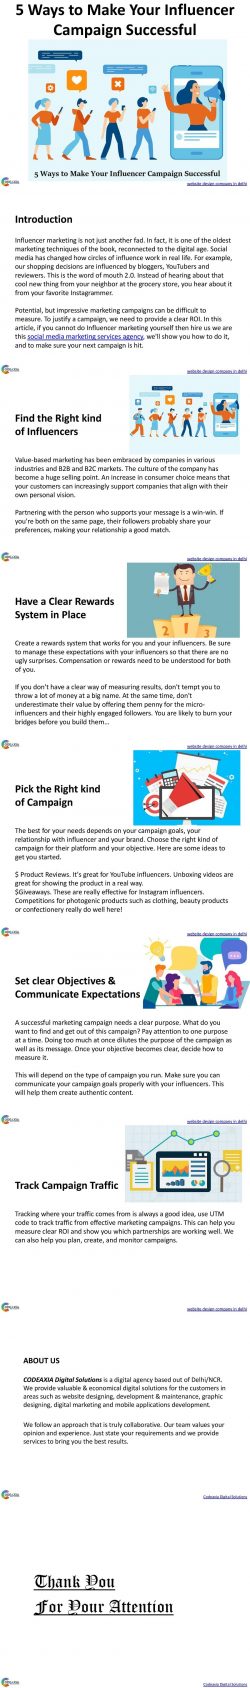 5 Ways to Make Your Influencer Campaign Successful